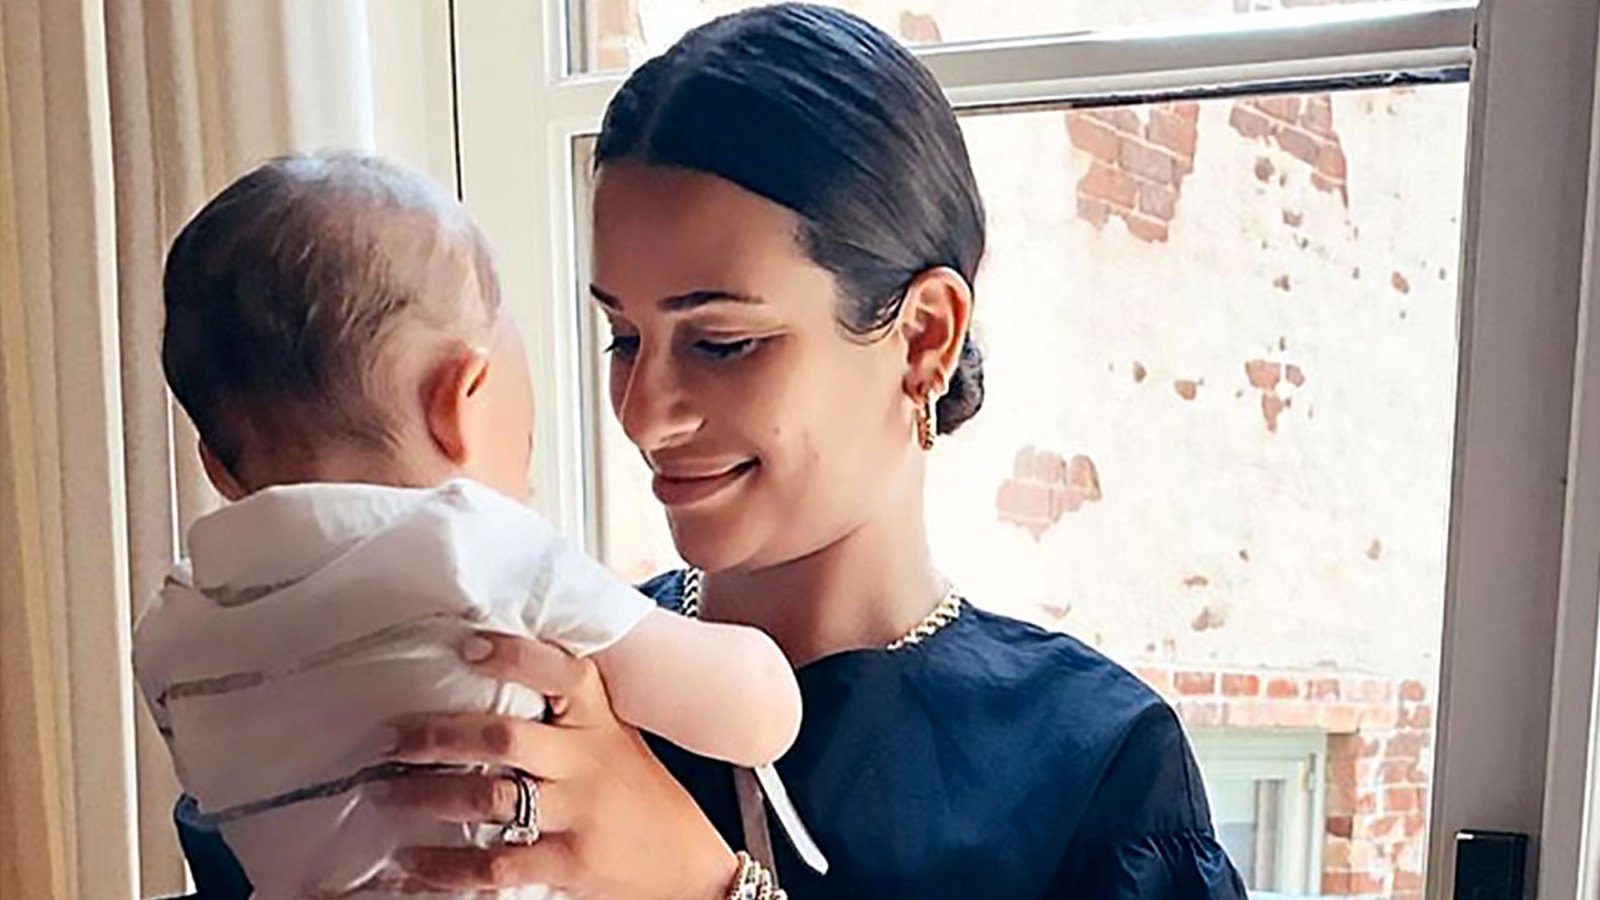 Lea Michele Calls Son Ever the ‘Greatest Gift’ Ahead of His 1st Birthday